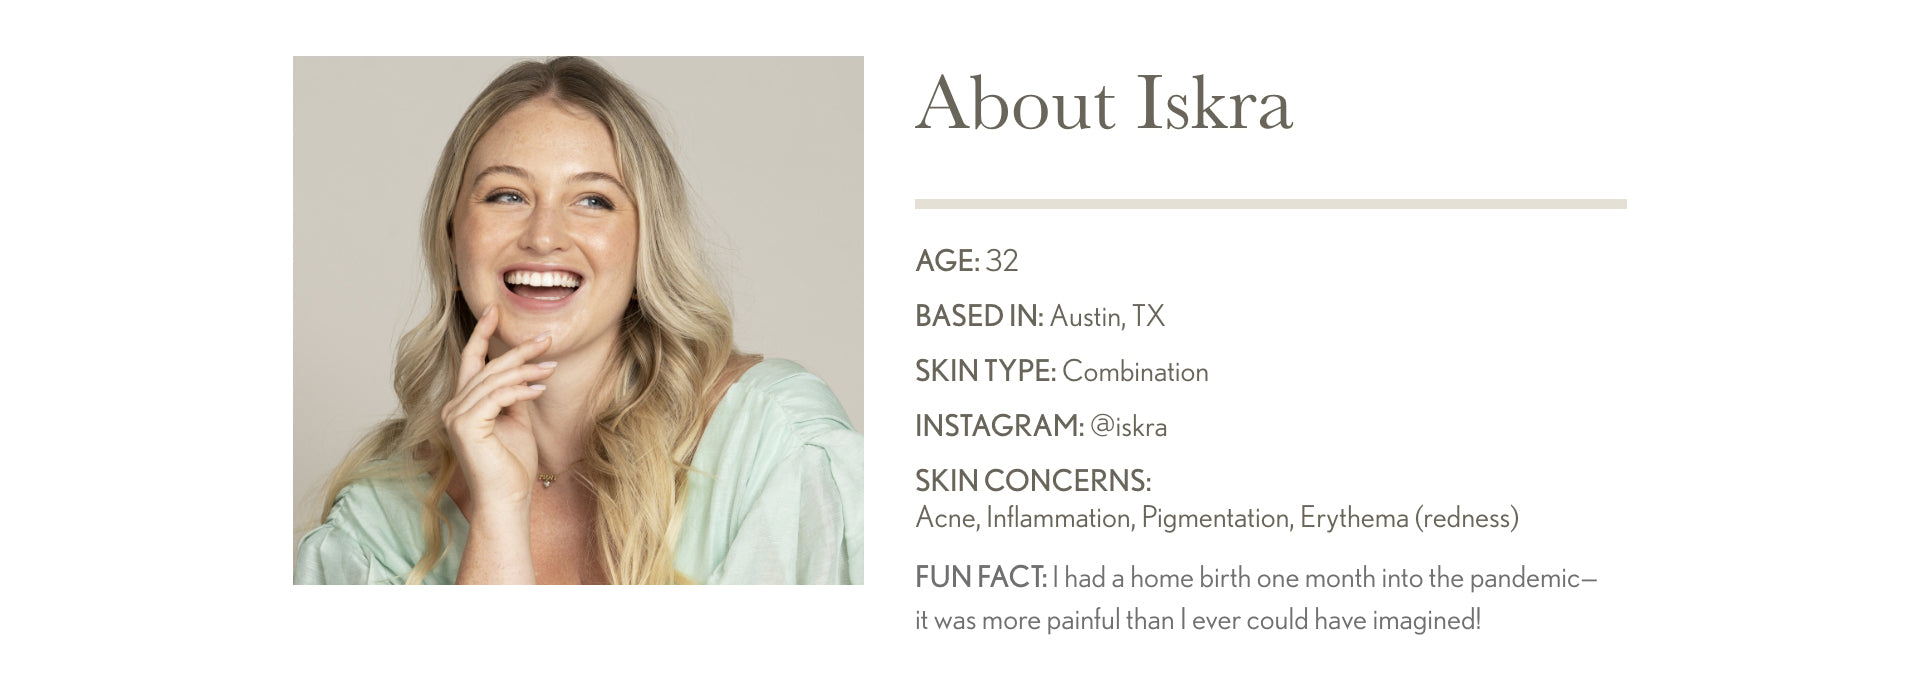 Picture of Iskra smiling. Text 